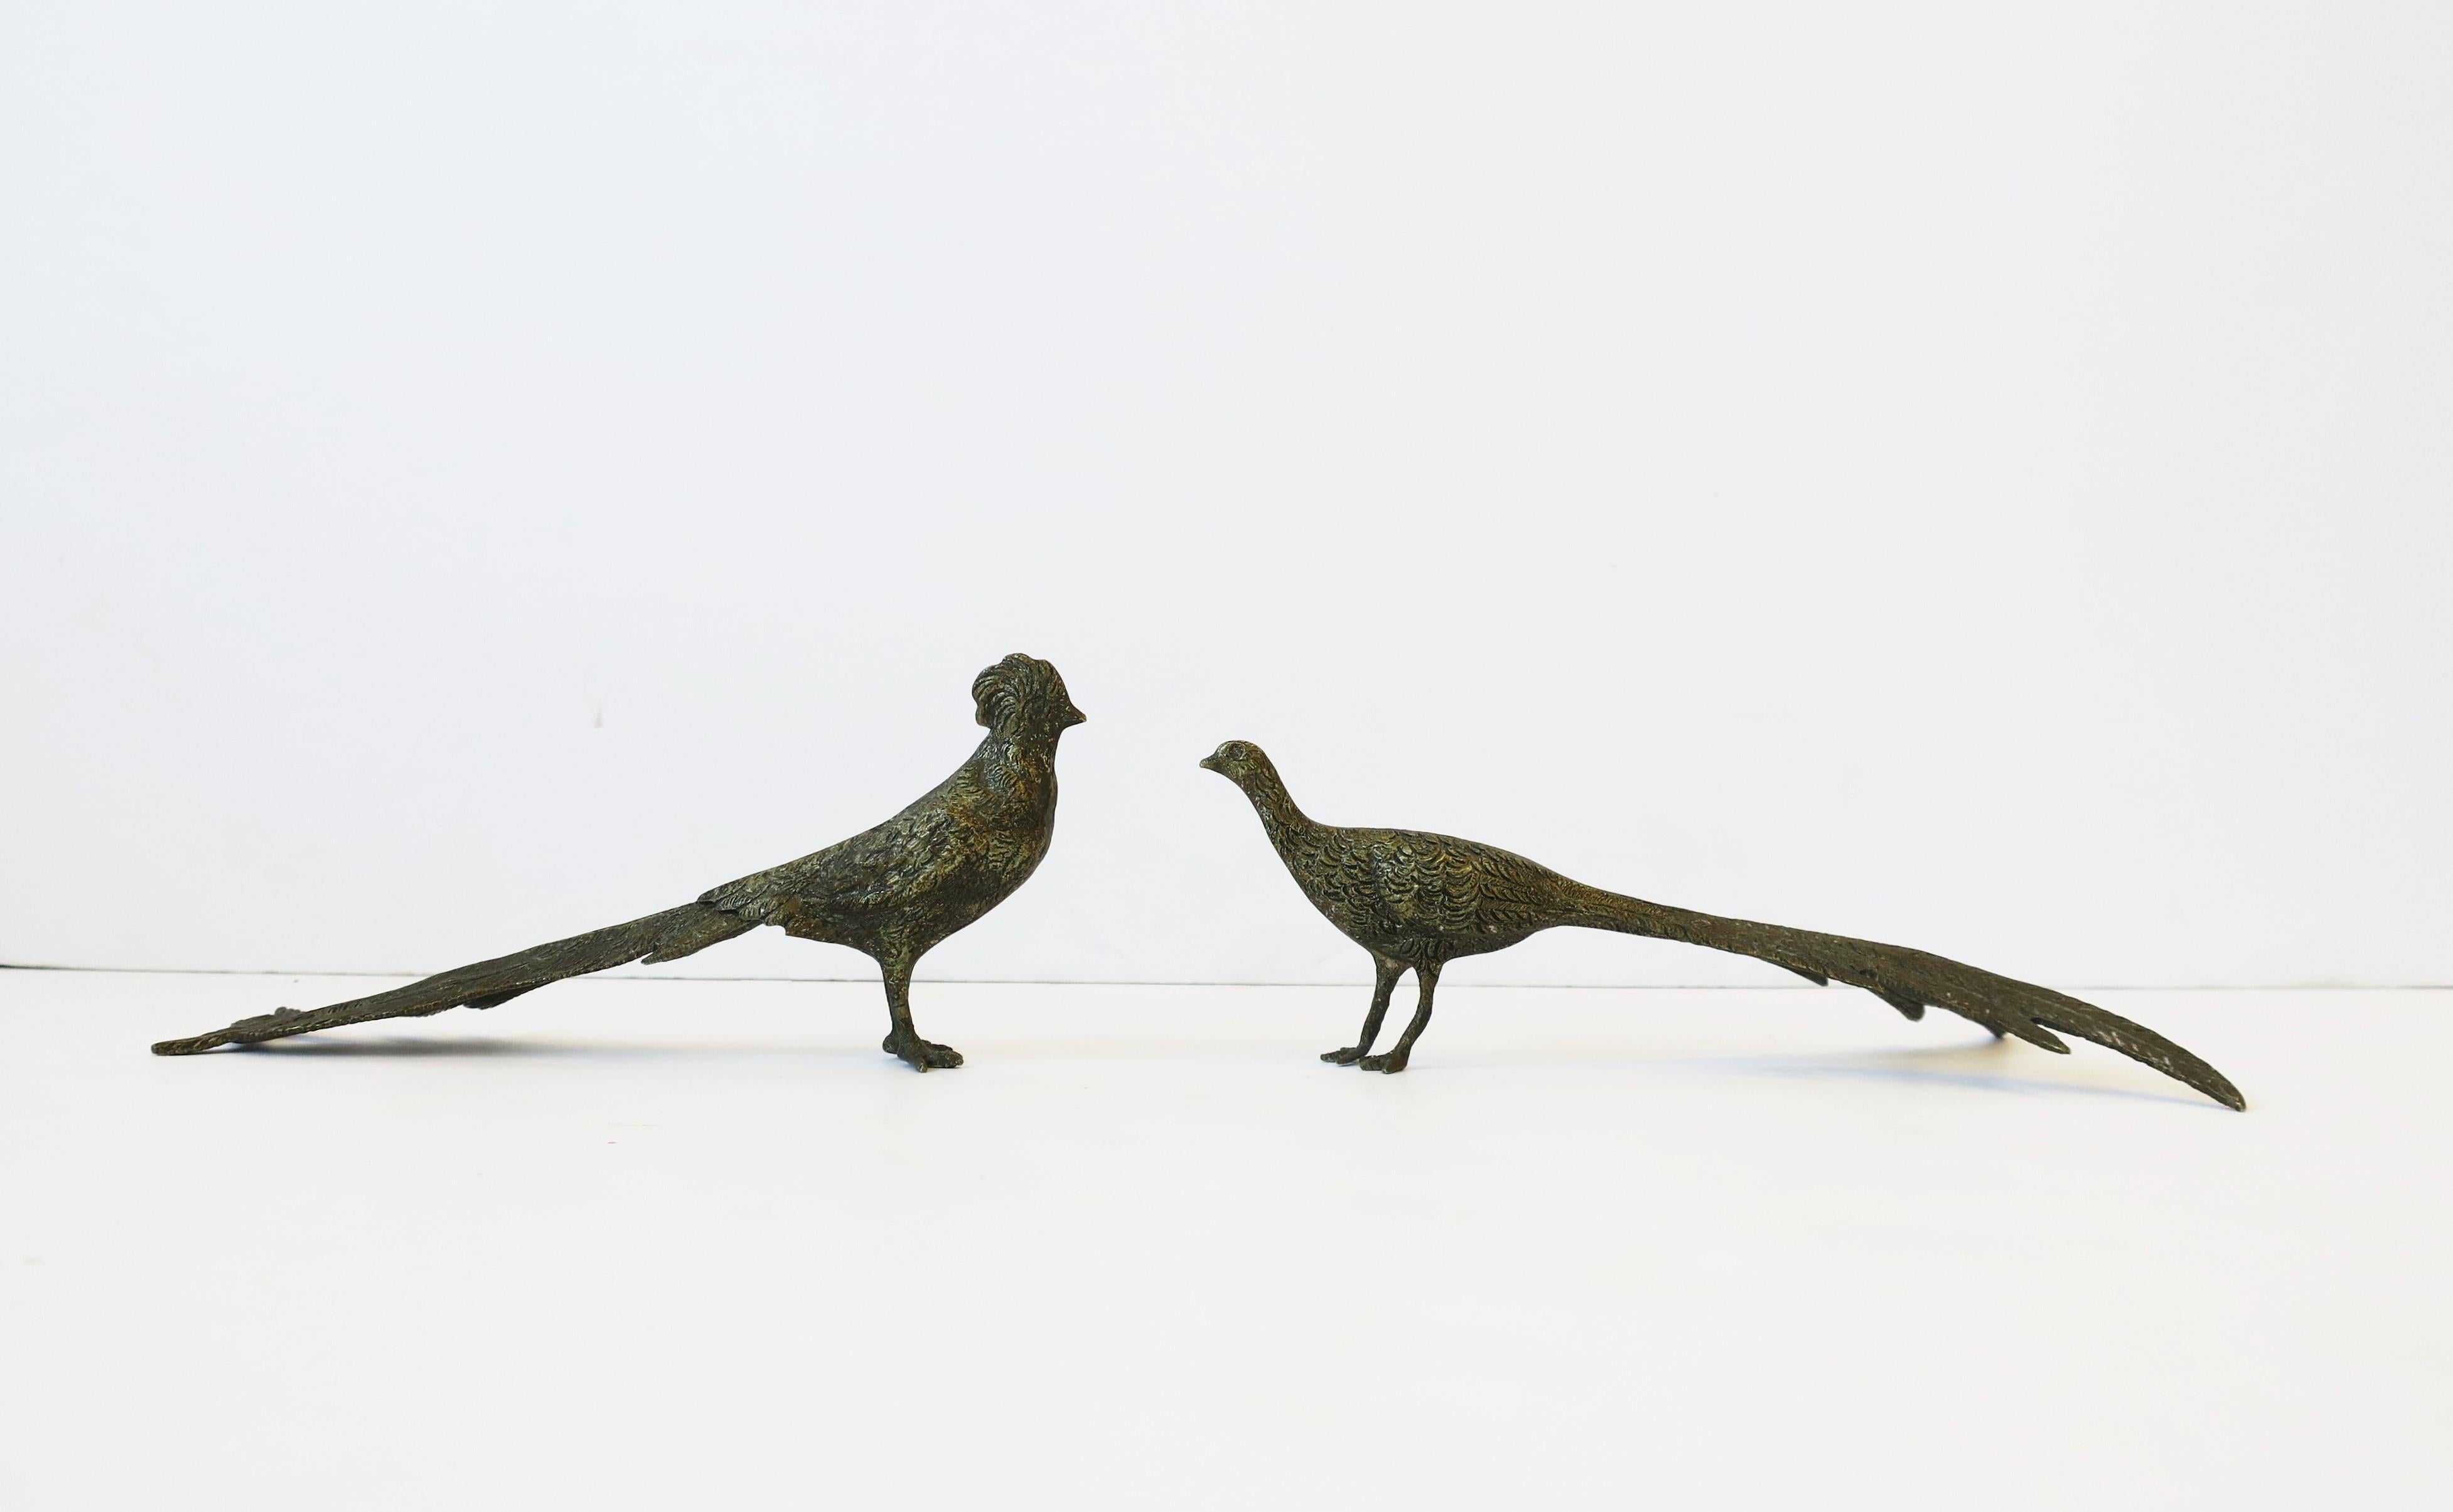 A small pair of brass peacock or pheasant bird decorative objects with textured surface, circa late-20th century. A great set for a bookshelf, fireplace mantle, dining table, etc. 

Measurements: 
.63